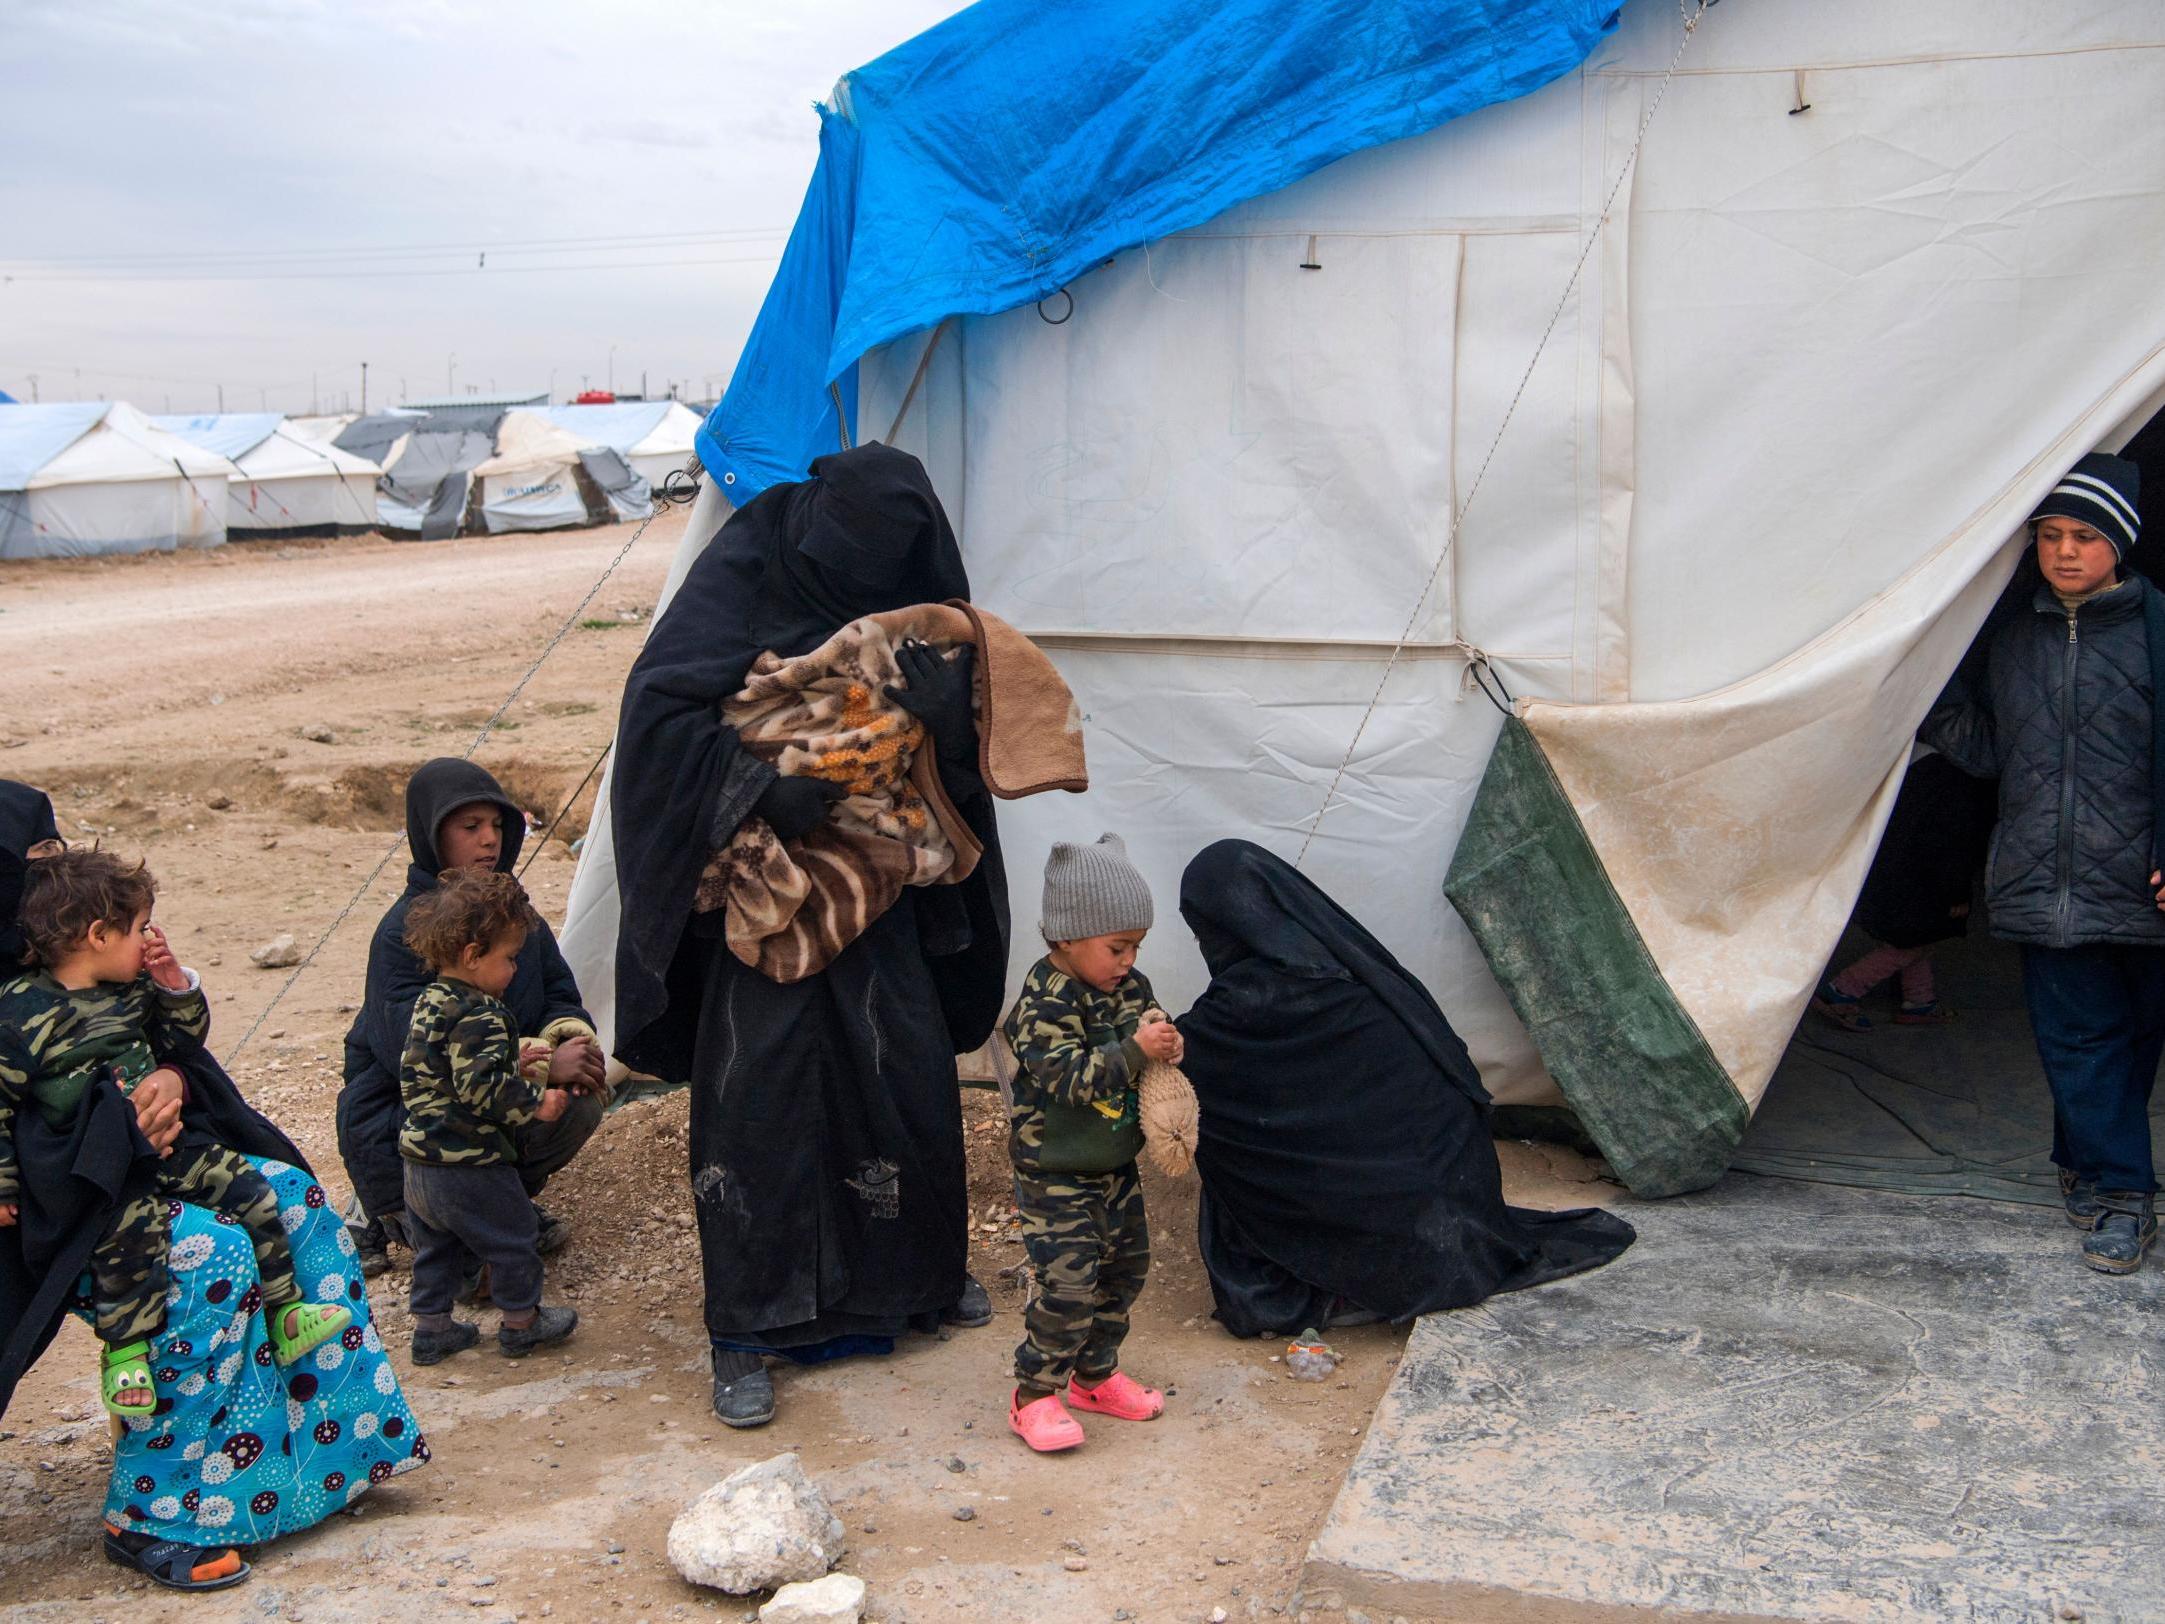 More than 2,500 children, from families 'with links to Isis' are in refugee camps, SCF says